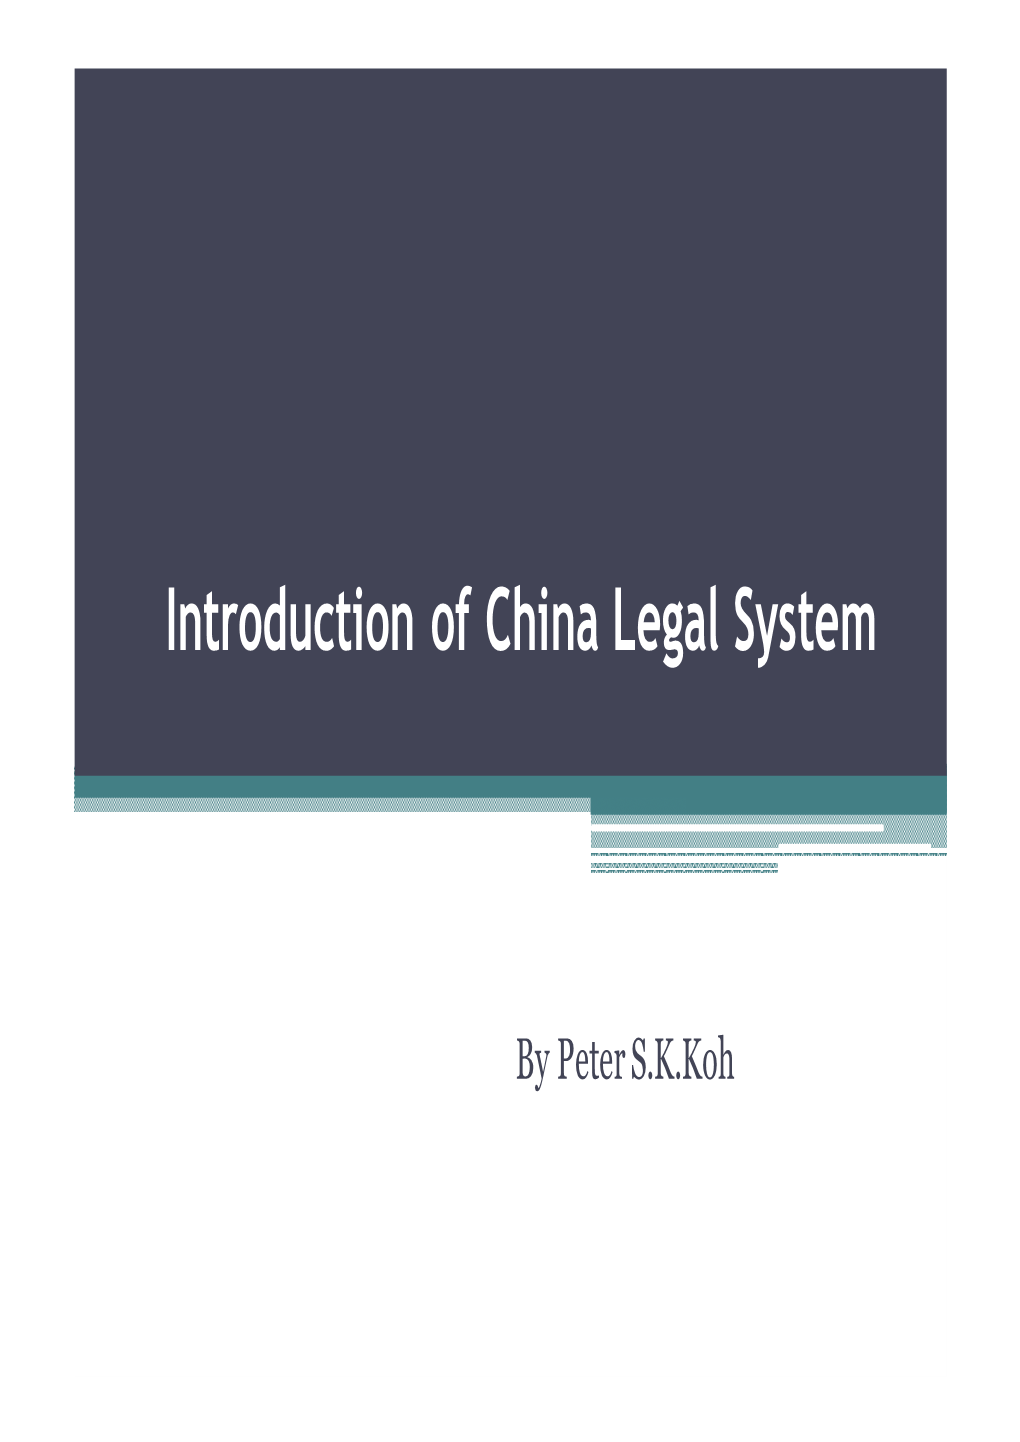 Introduction of China Legal System